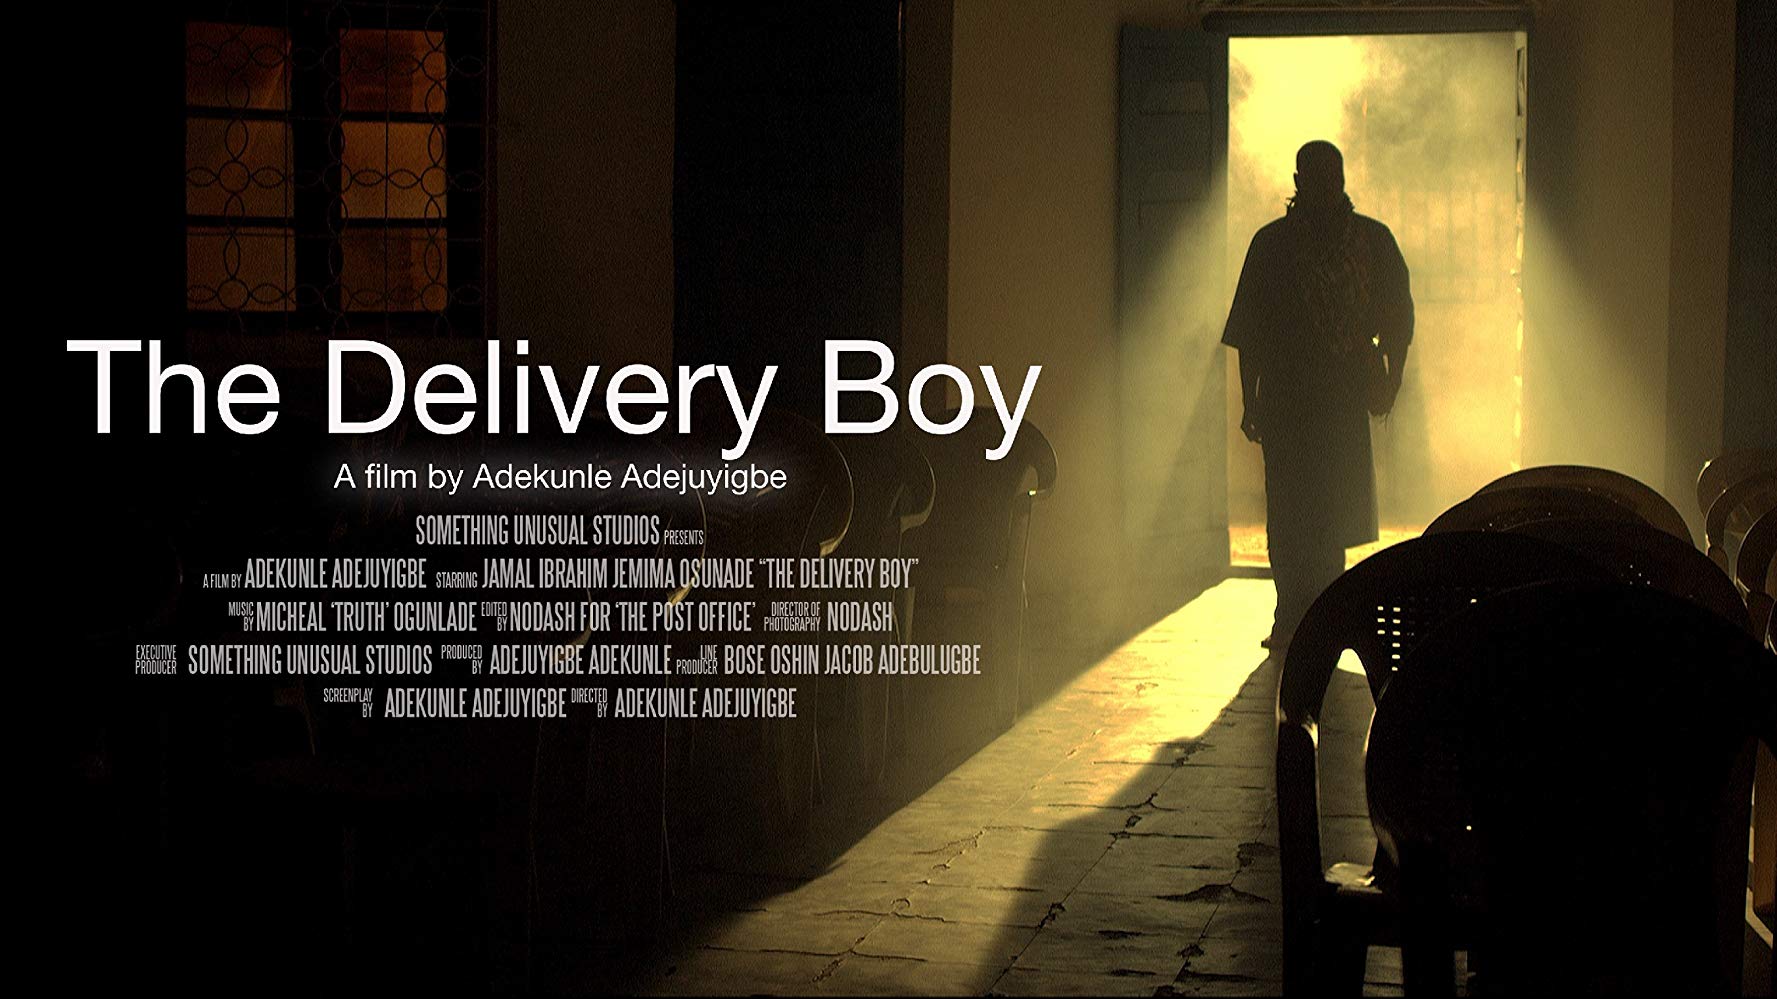 tdb 1 - Can Kunle Adejuyigbe ''The Delivery Boy'' Deliver at the NGN Box Office?